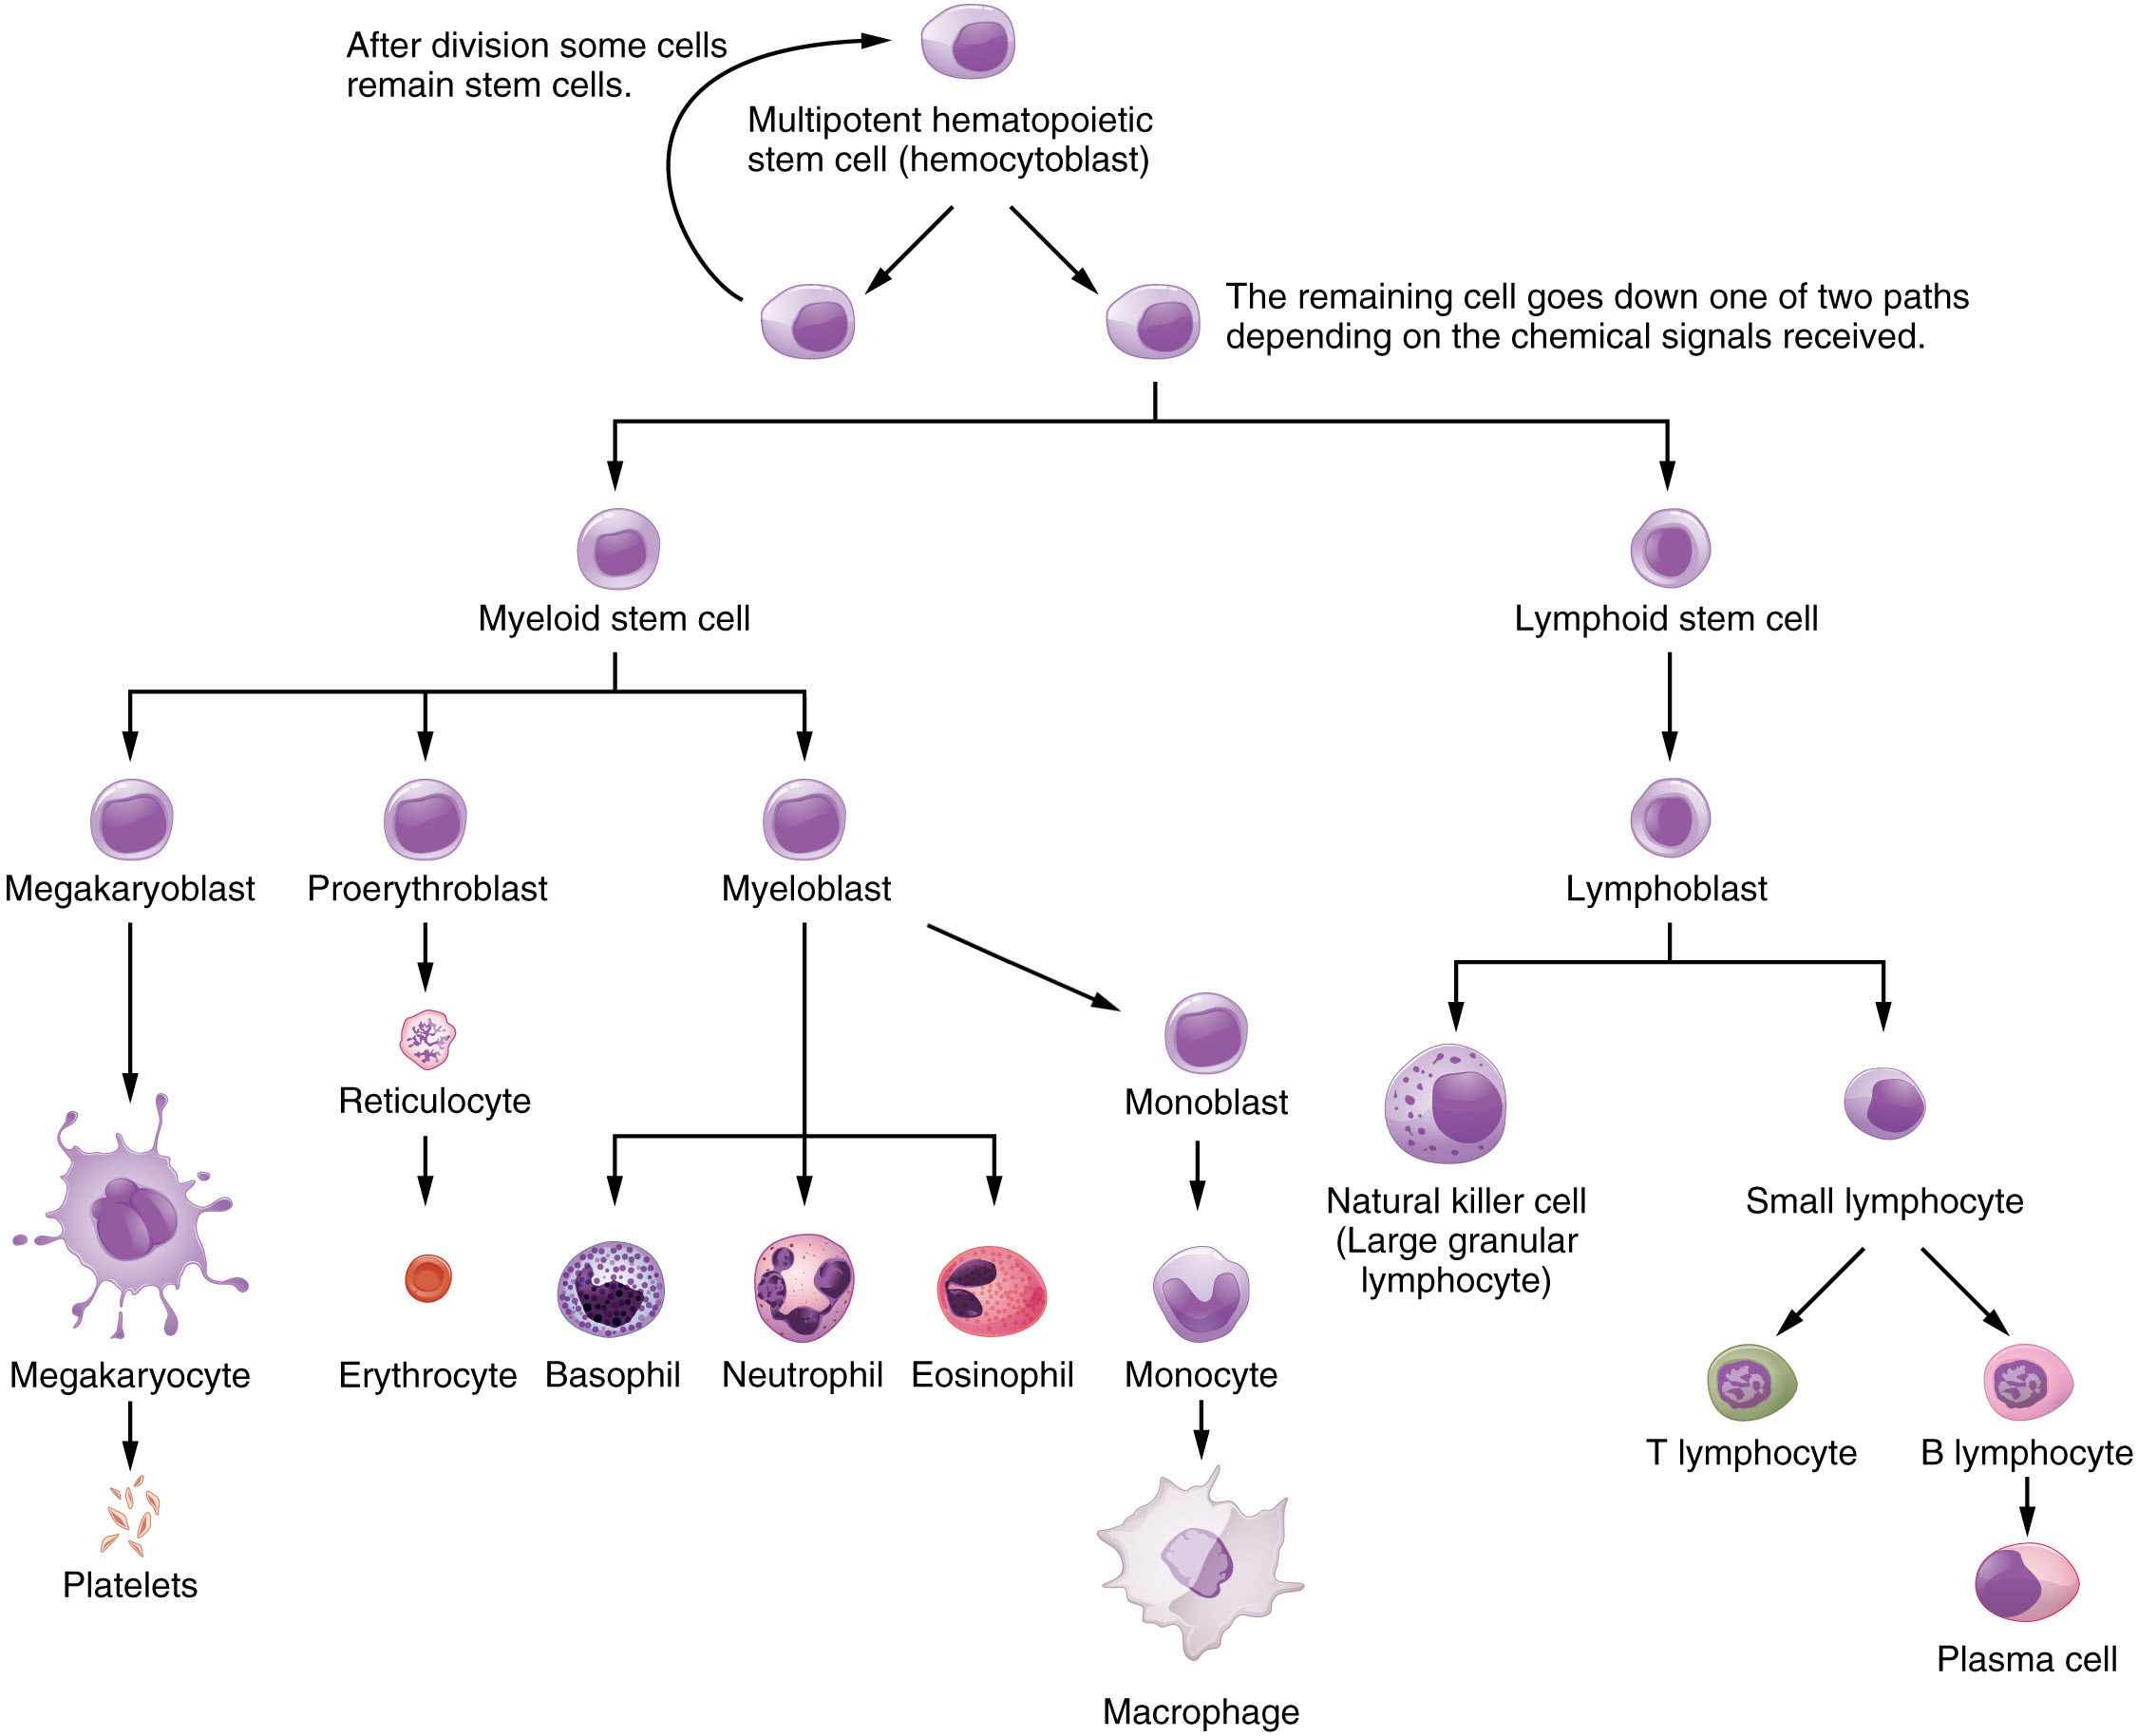 Flow chart of hematopoietic cell divisions in the bone marrow.